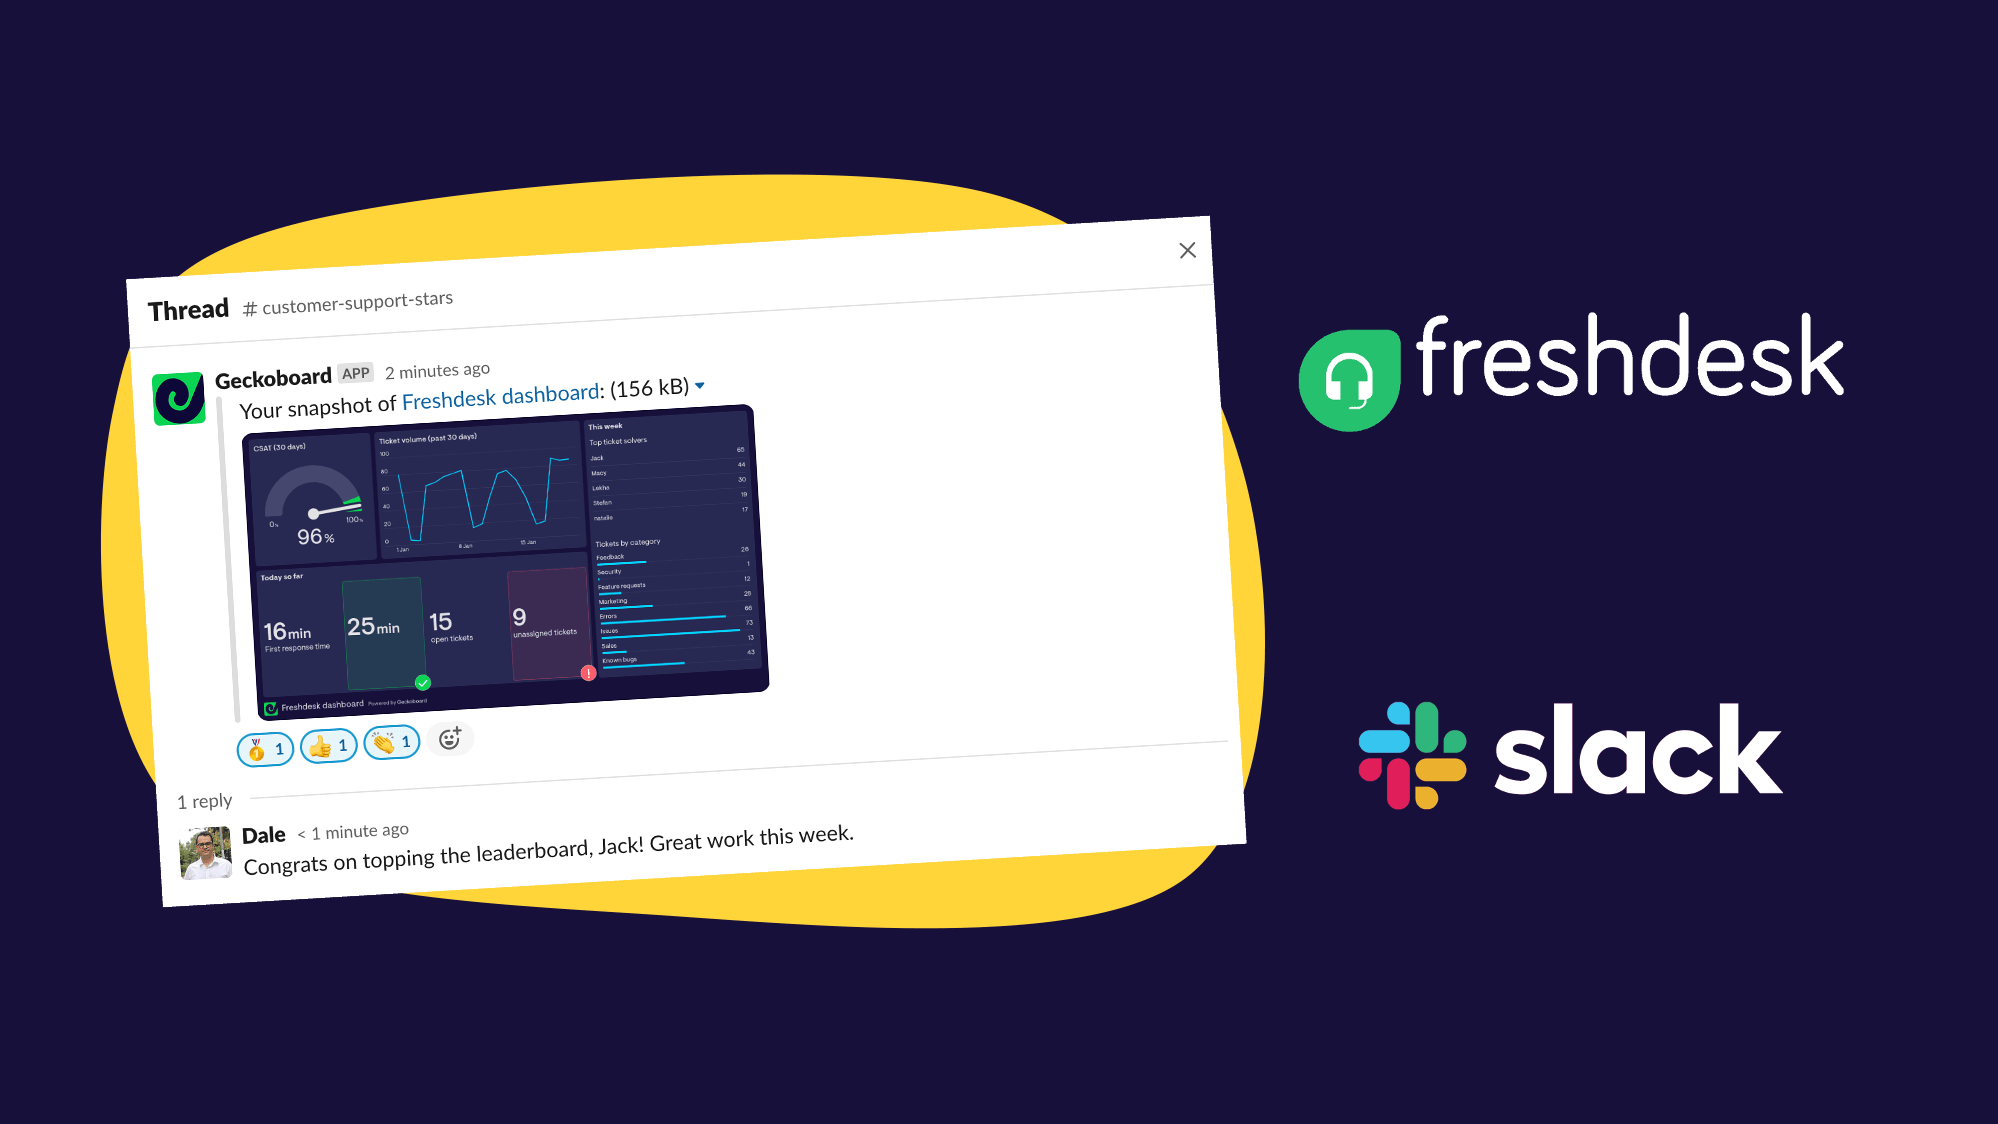 How to connect Freshdesk to Slack & generate KPI dashboards